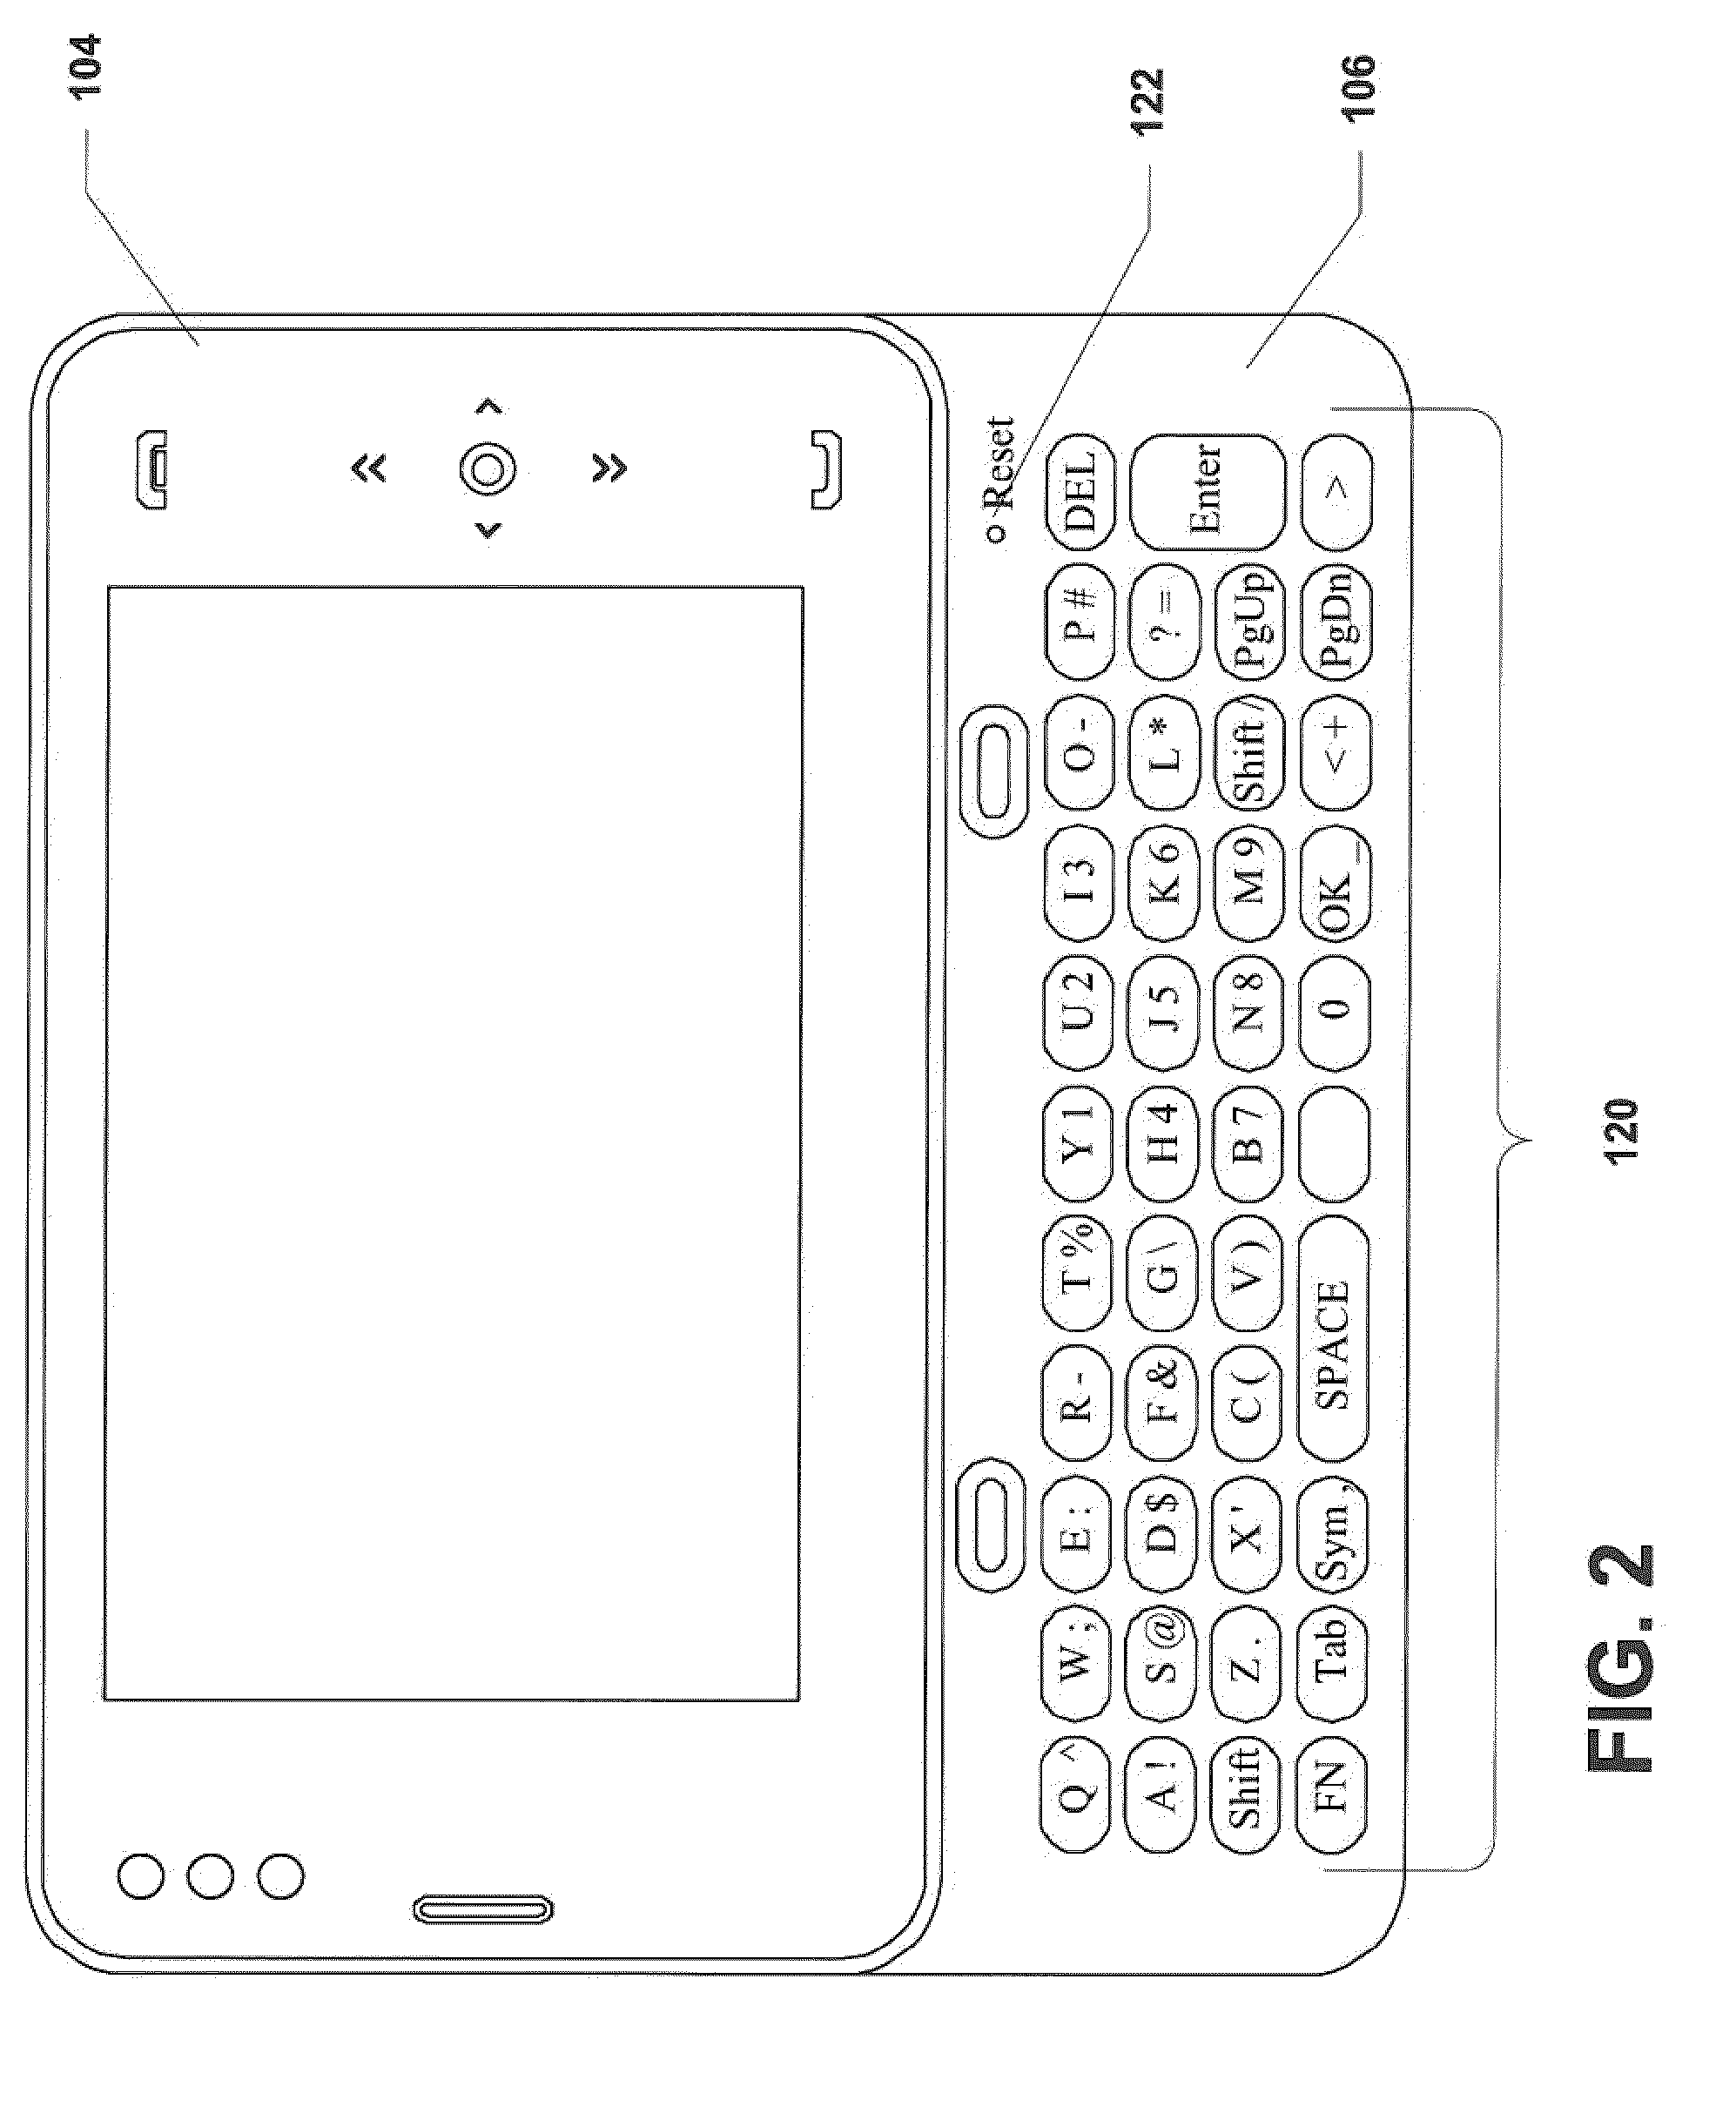 Keyboard for a portable computing device